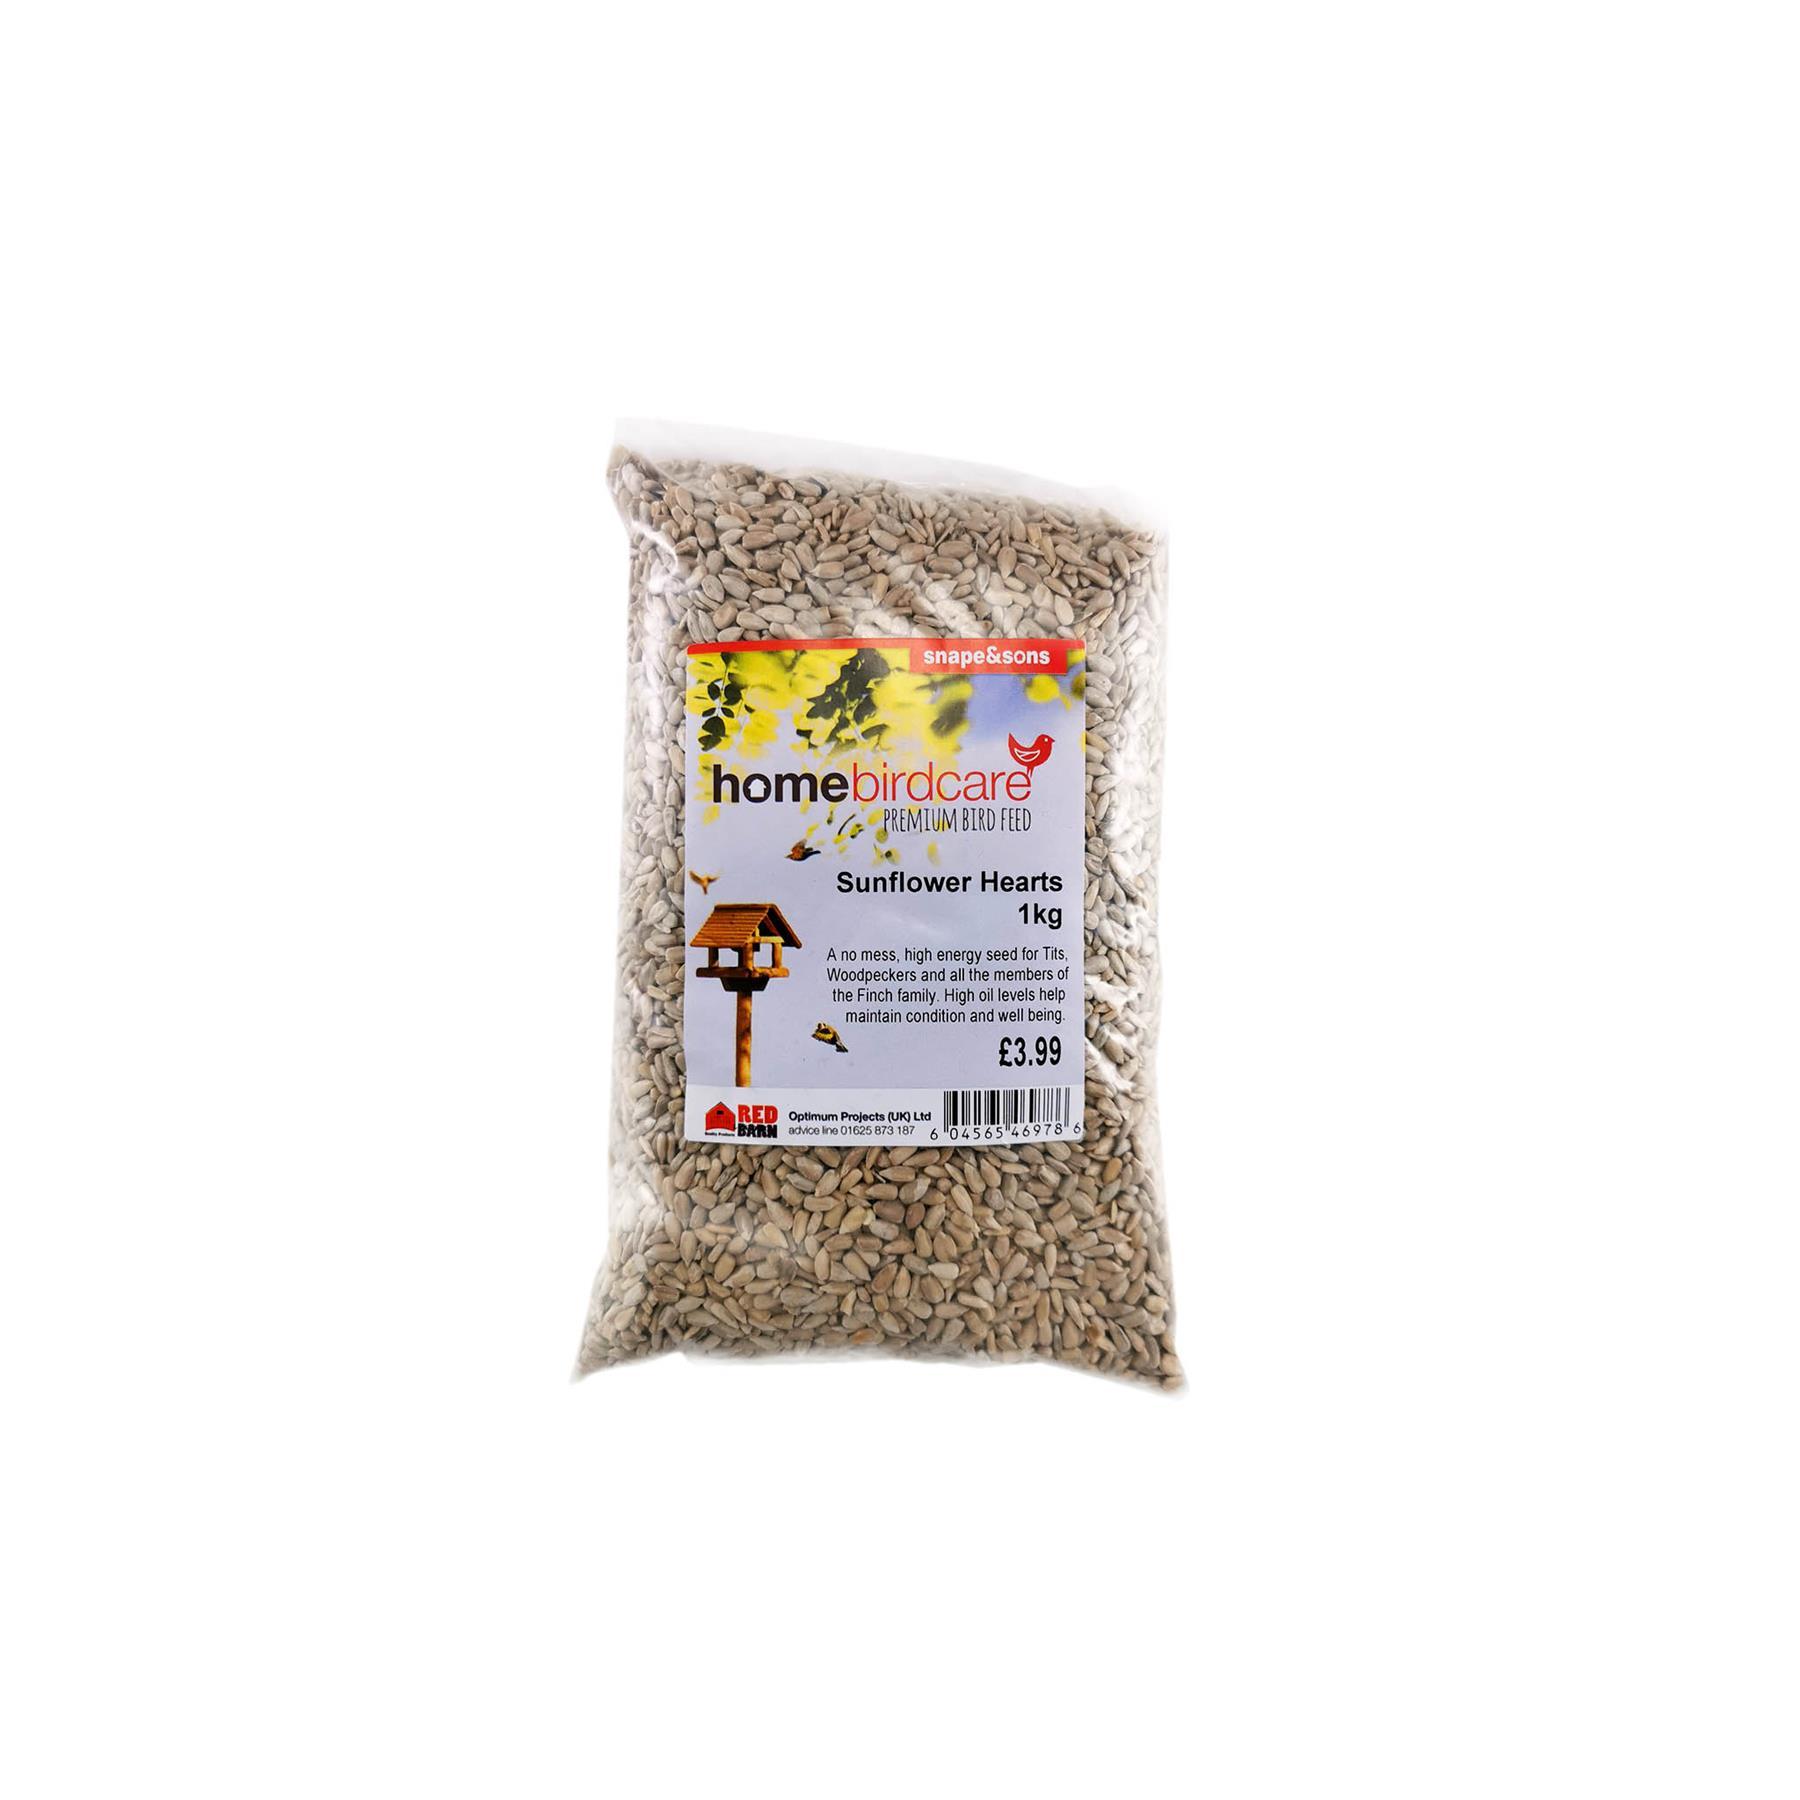 Home Birdcare - Sunflower Hearts 1kg Bird Feed Straights | Snape & Sons